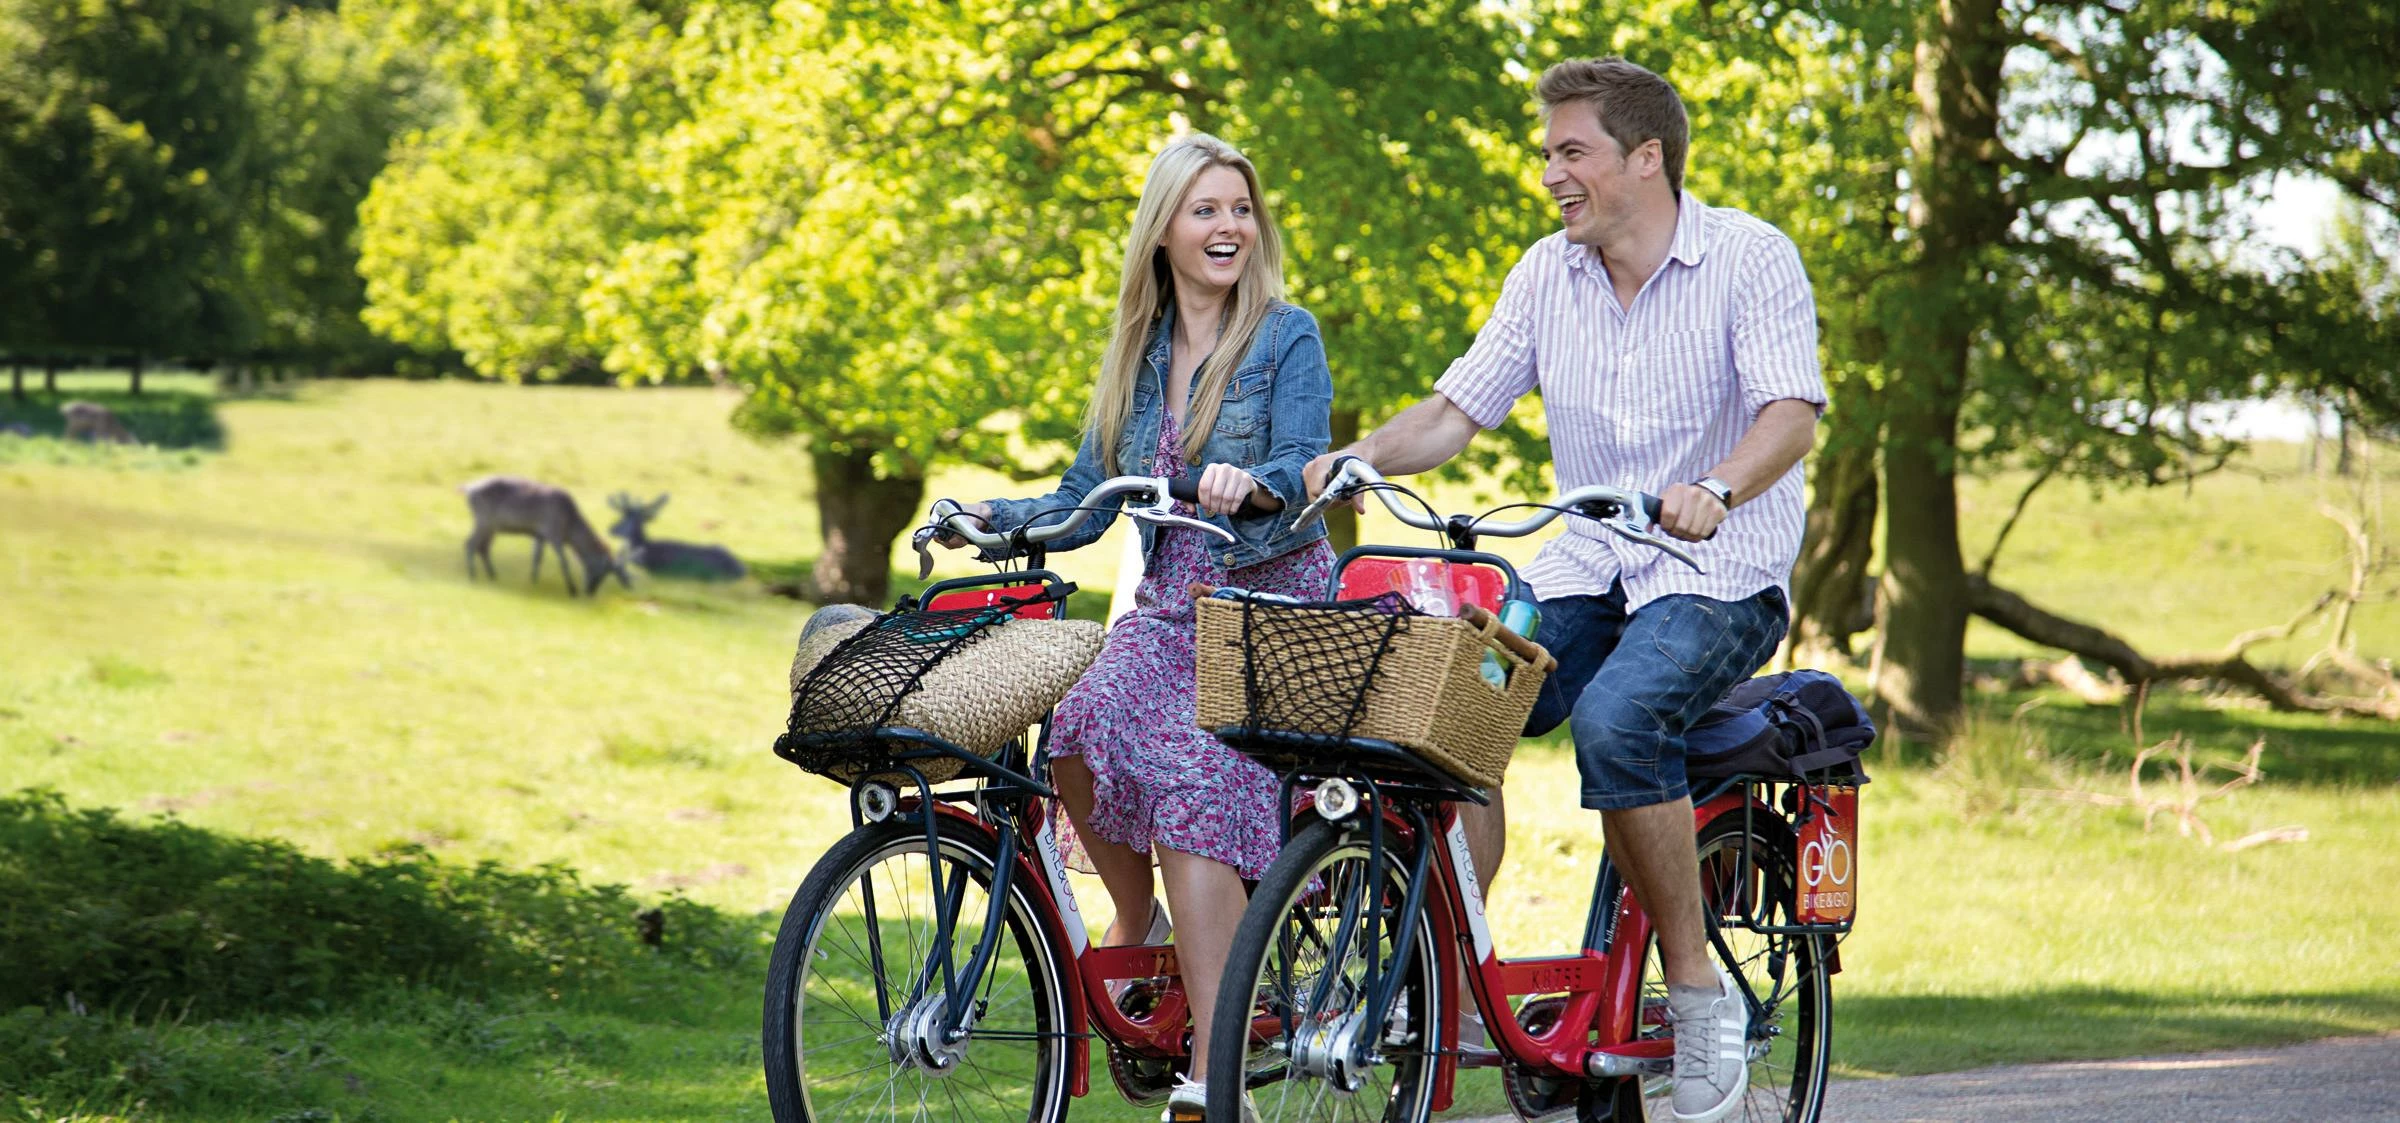 Bike & Go has been named as one of the best bike hire schemes in the country